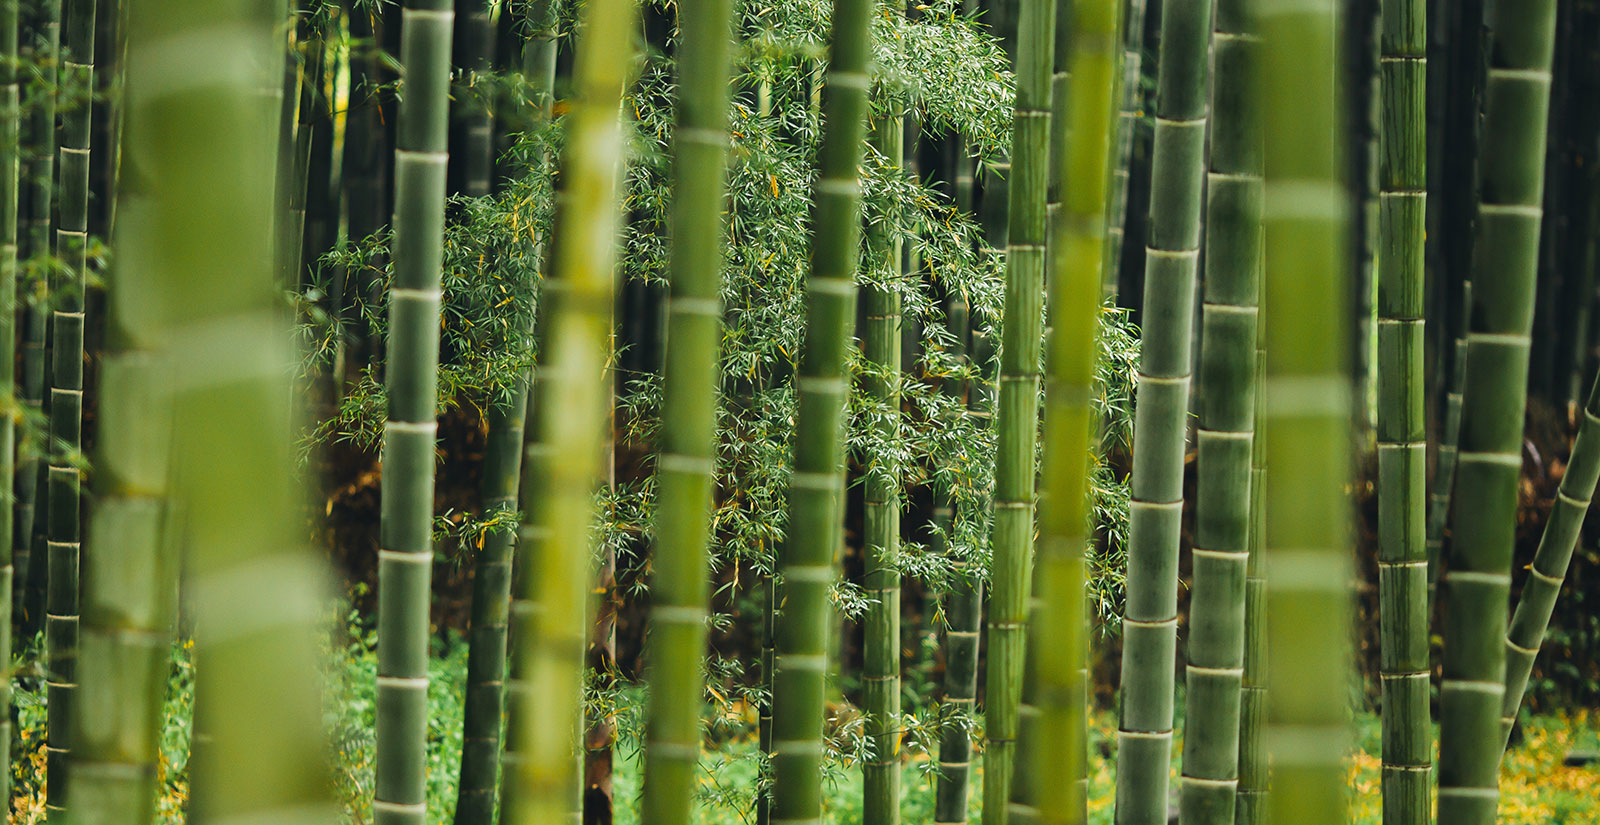 Photo of a bamboo forest, showing sustainability